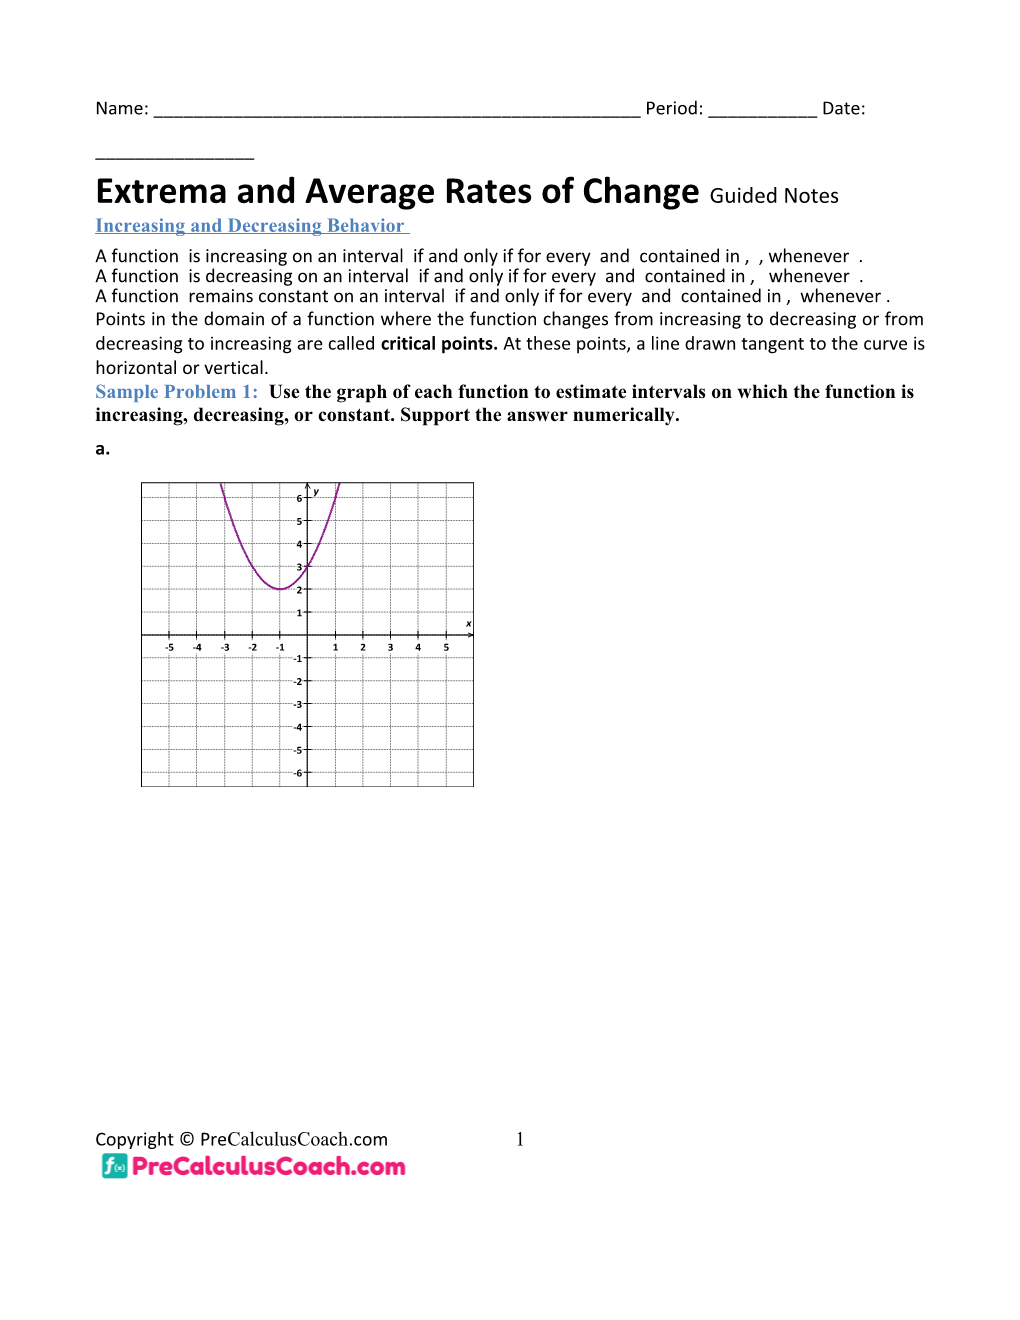 Extrema and Average Rates of Change Guided Notes